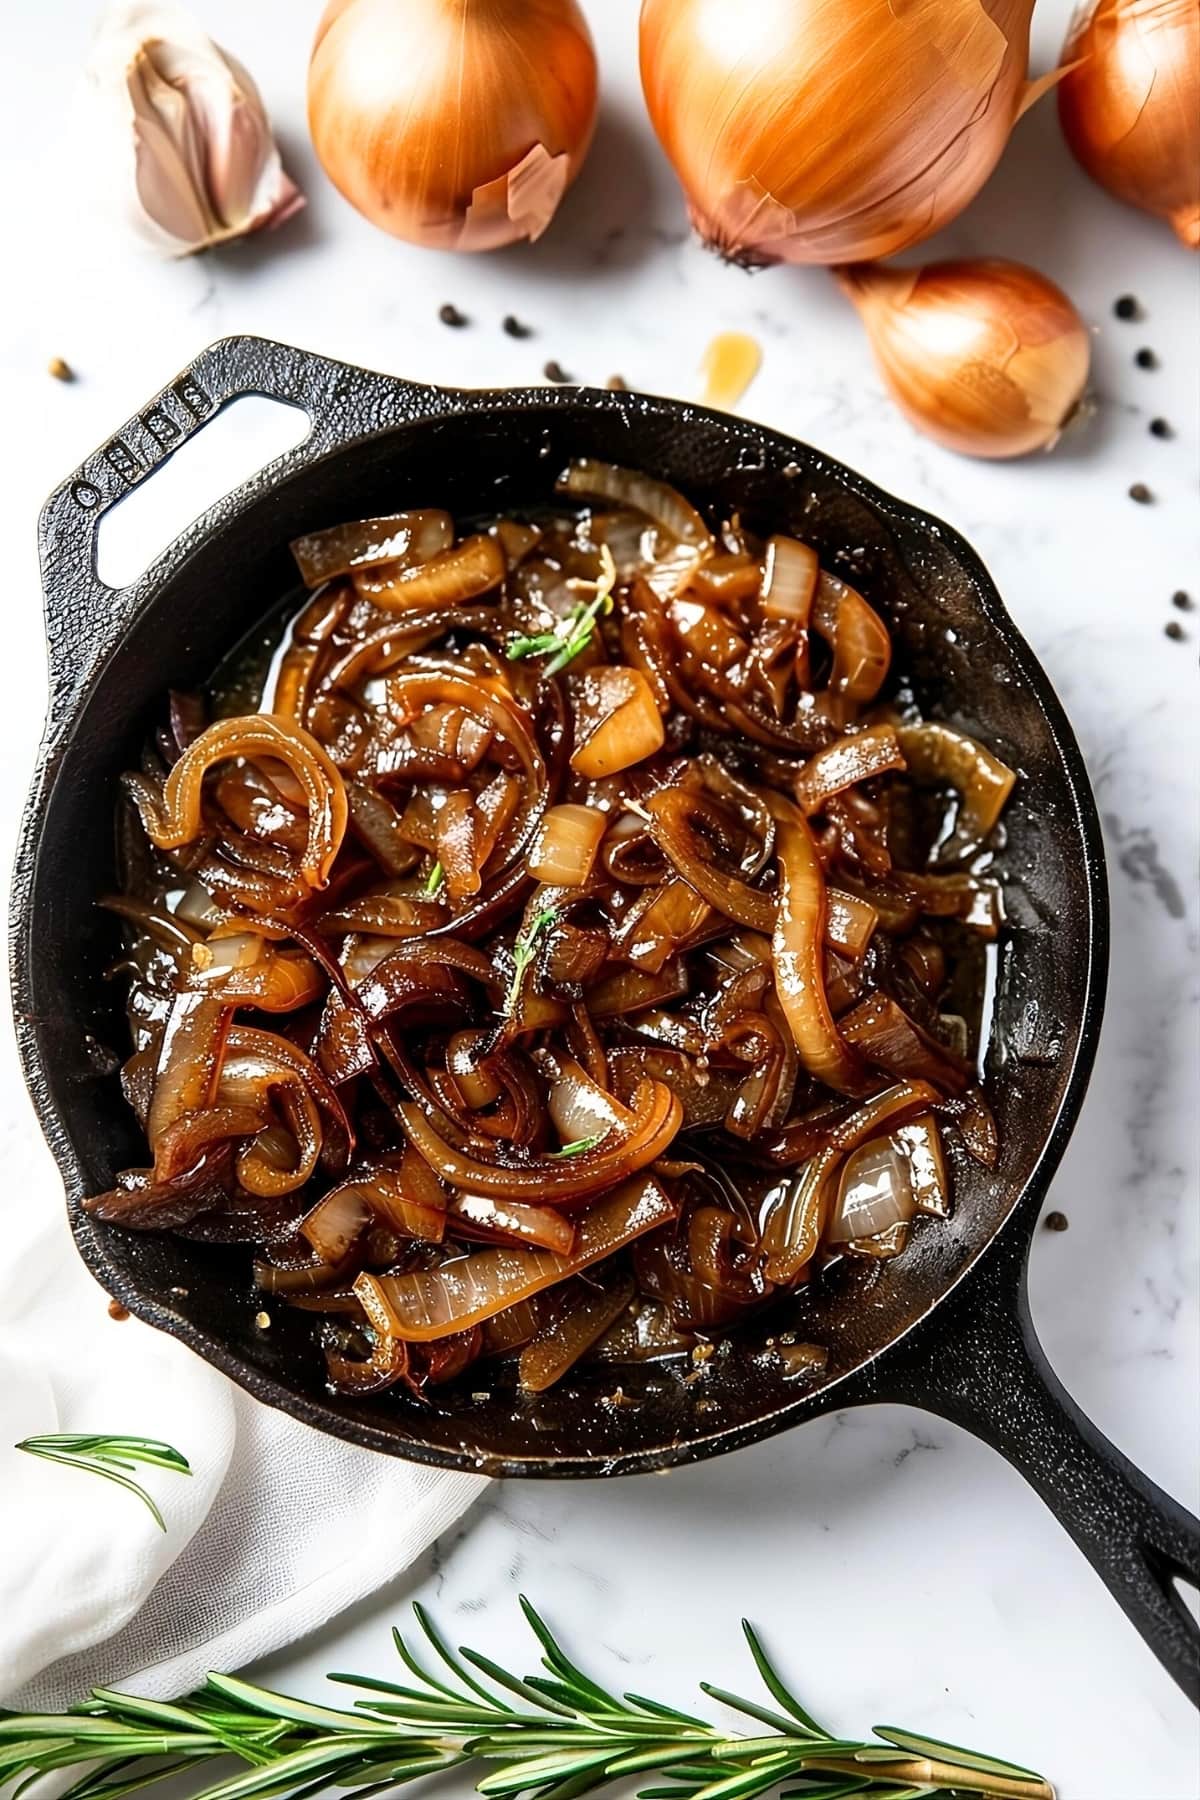 Caramelized onion in a cast iron skillet on a white marble surface.